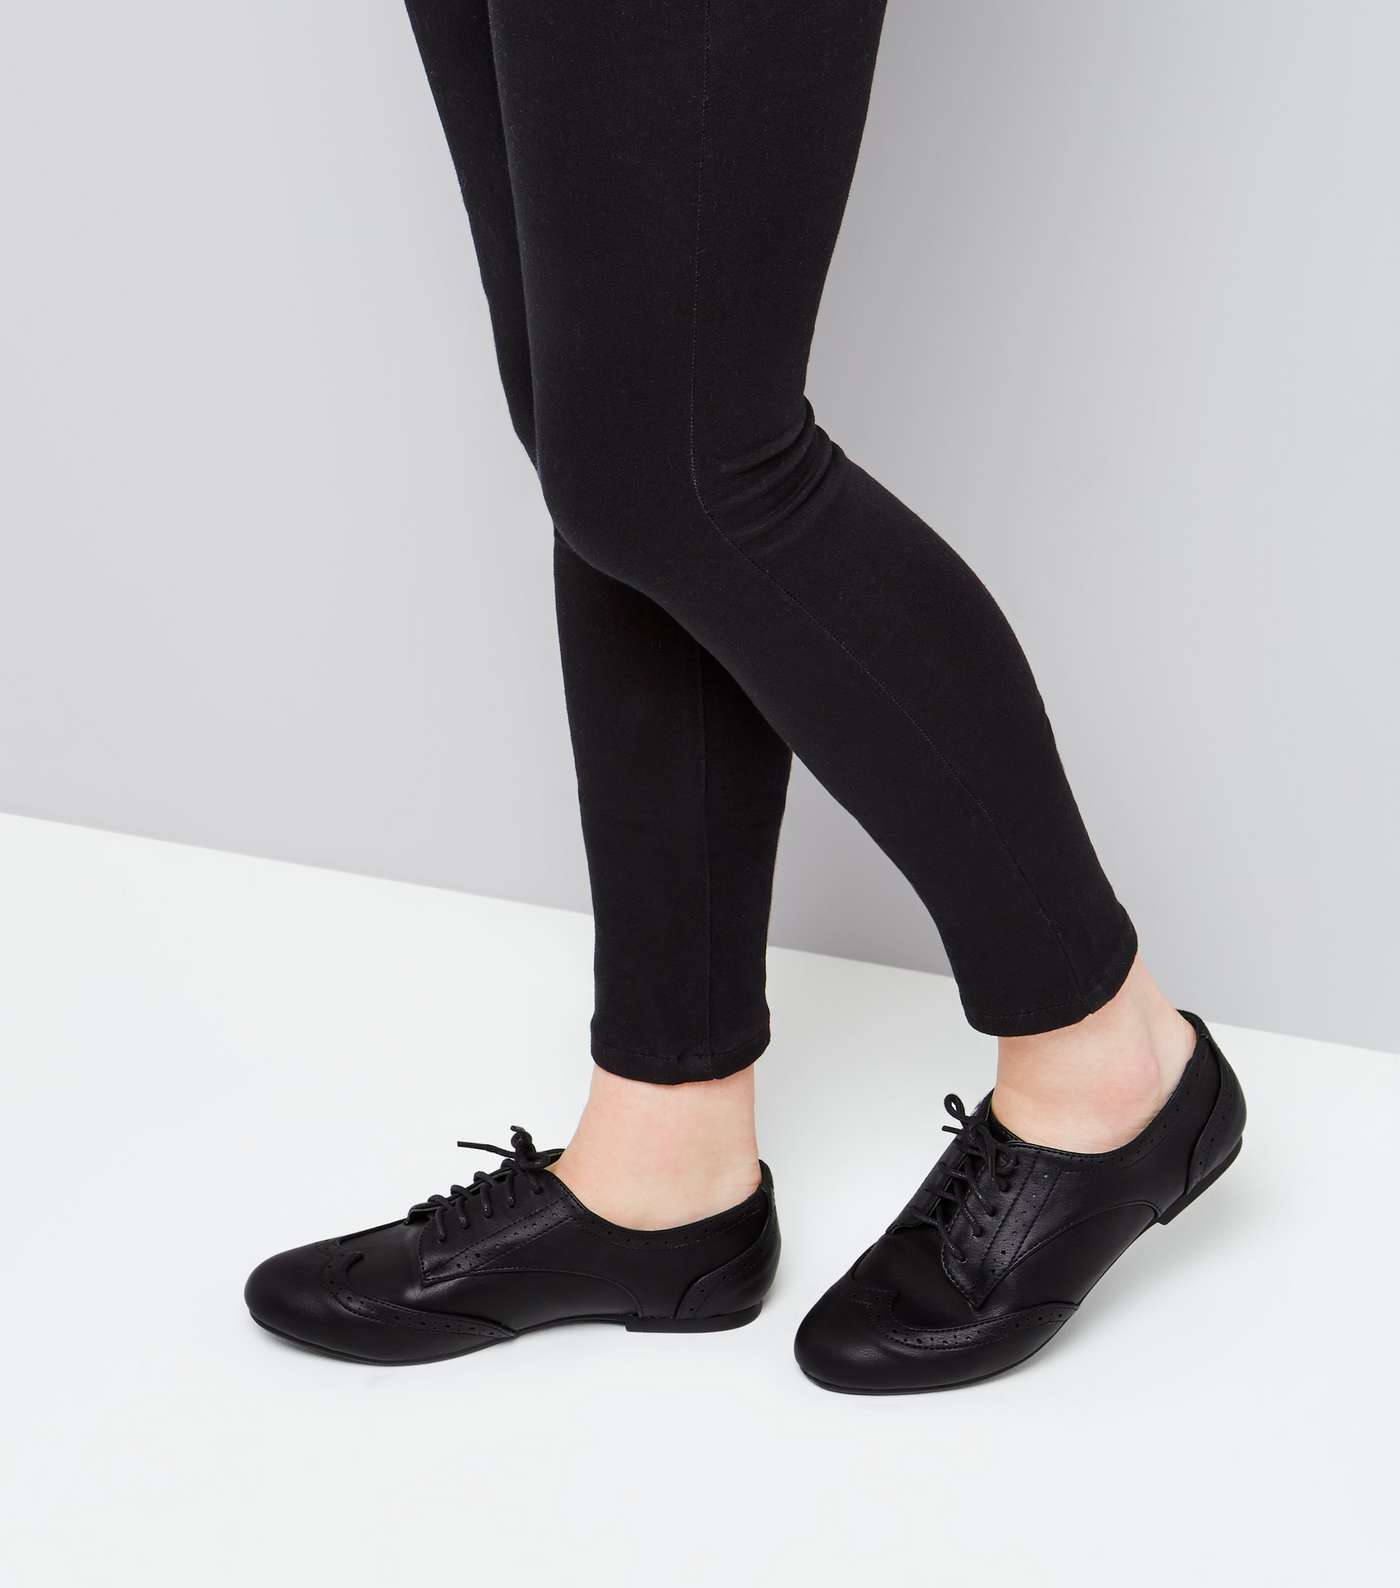 Girls Black Leather-Look Brogues Image 3